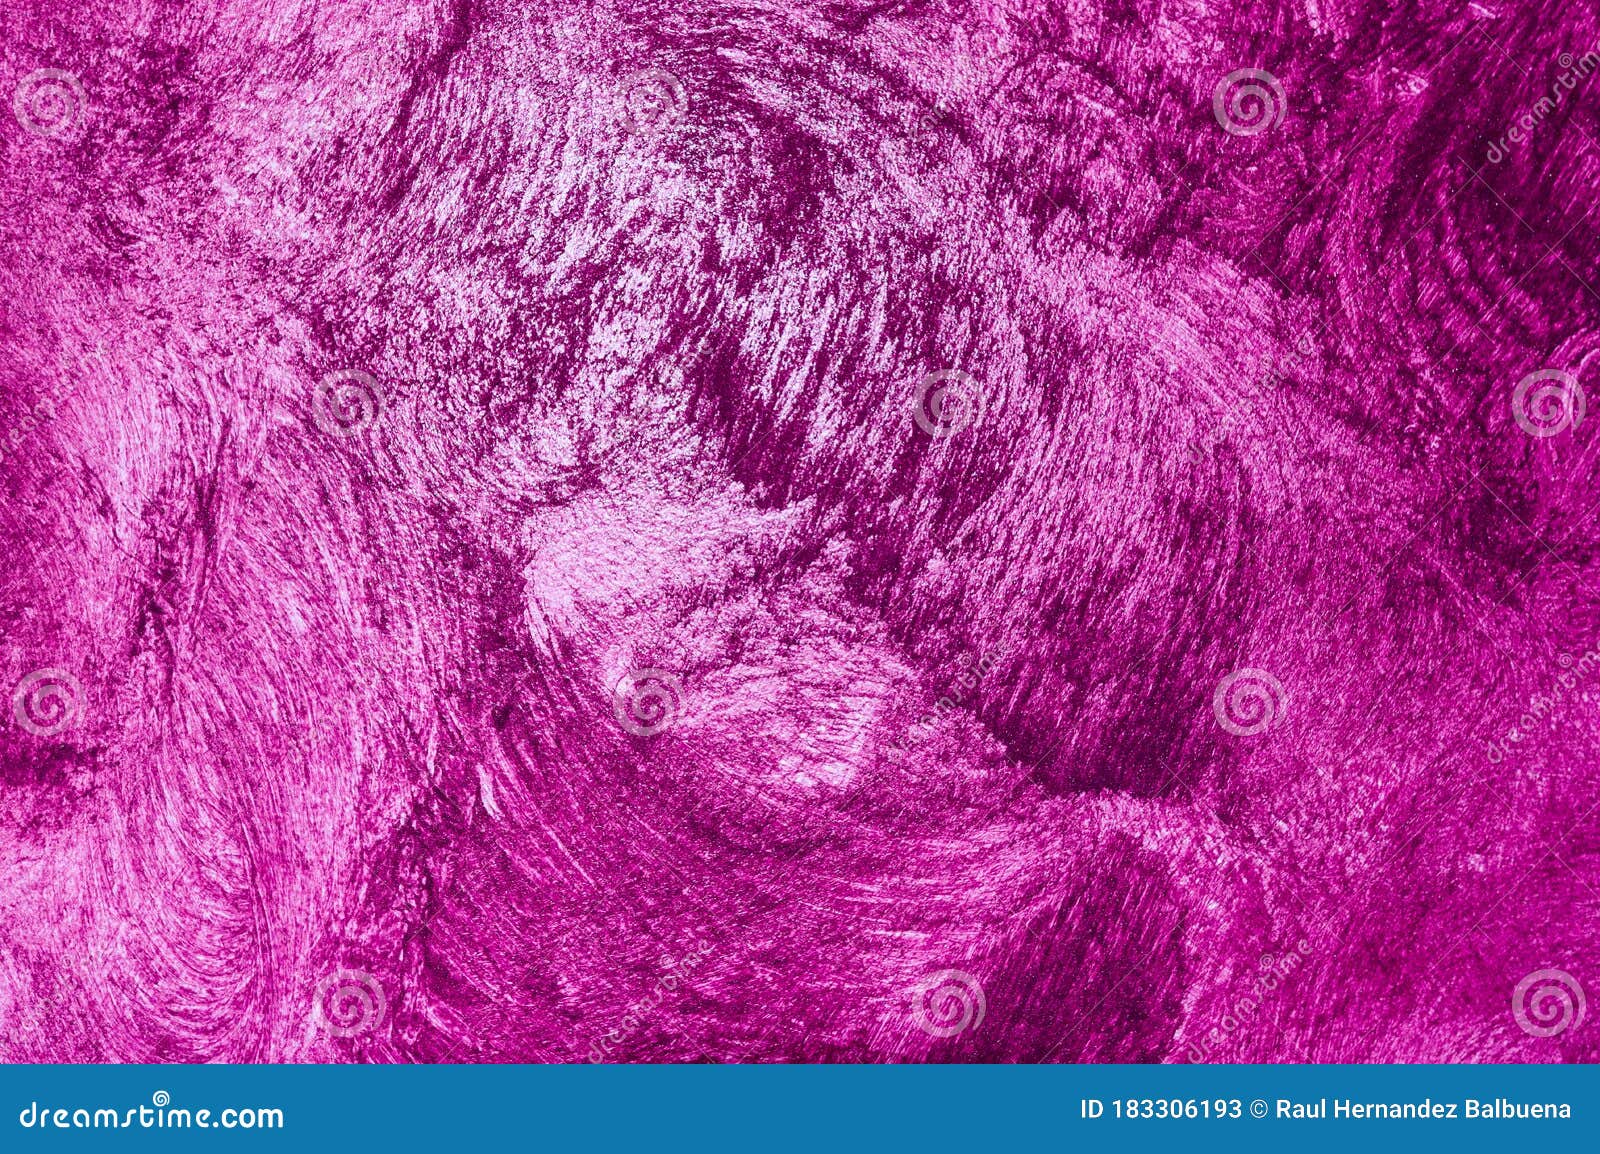 Wallpaper in Eggplant or Purple Color Tone Stock Image - Image of floor,  abstract: 183306193